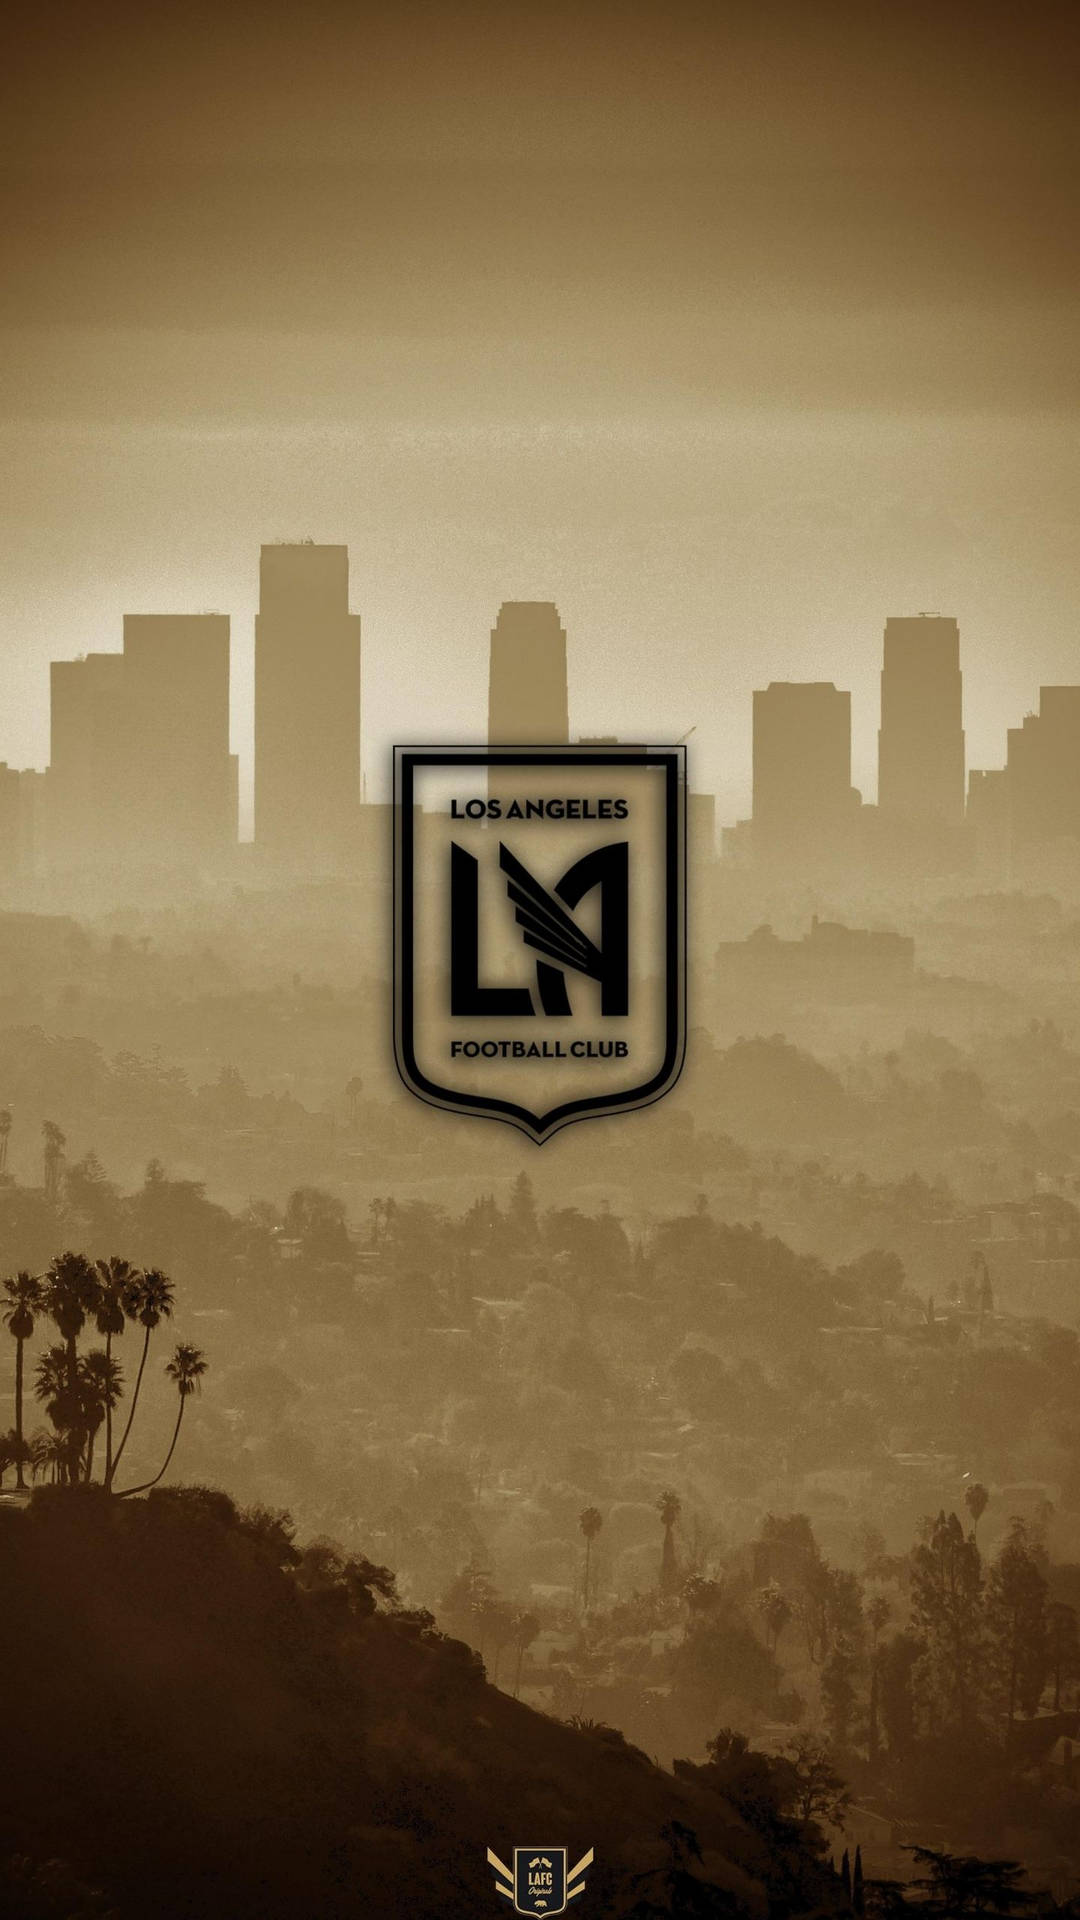 Lafc With Brown City Backdrop Wallpaper